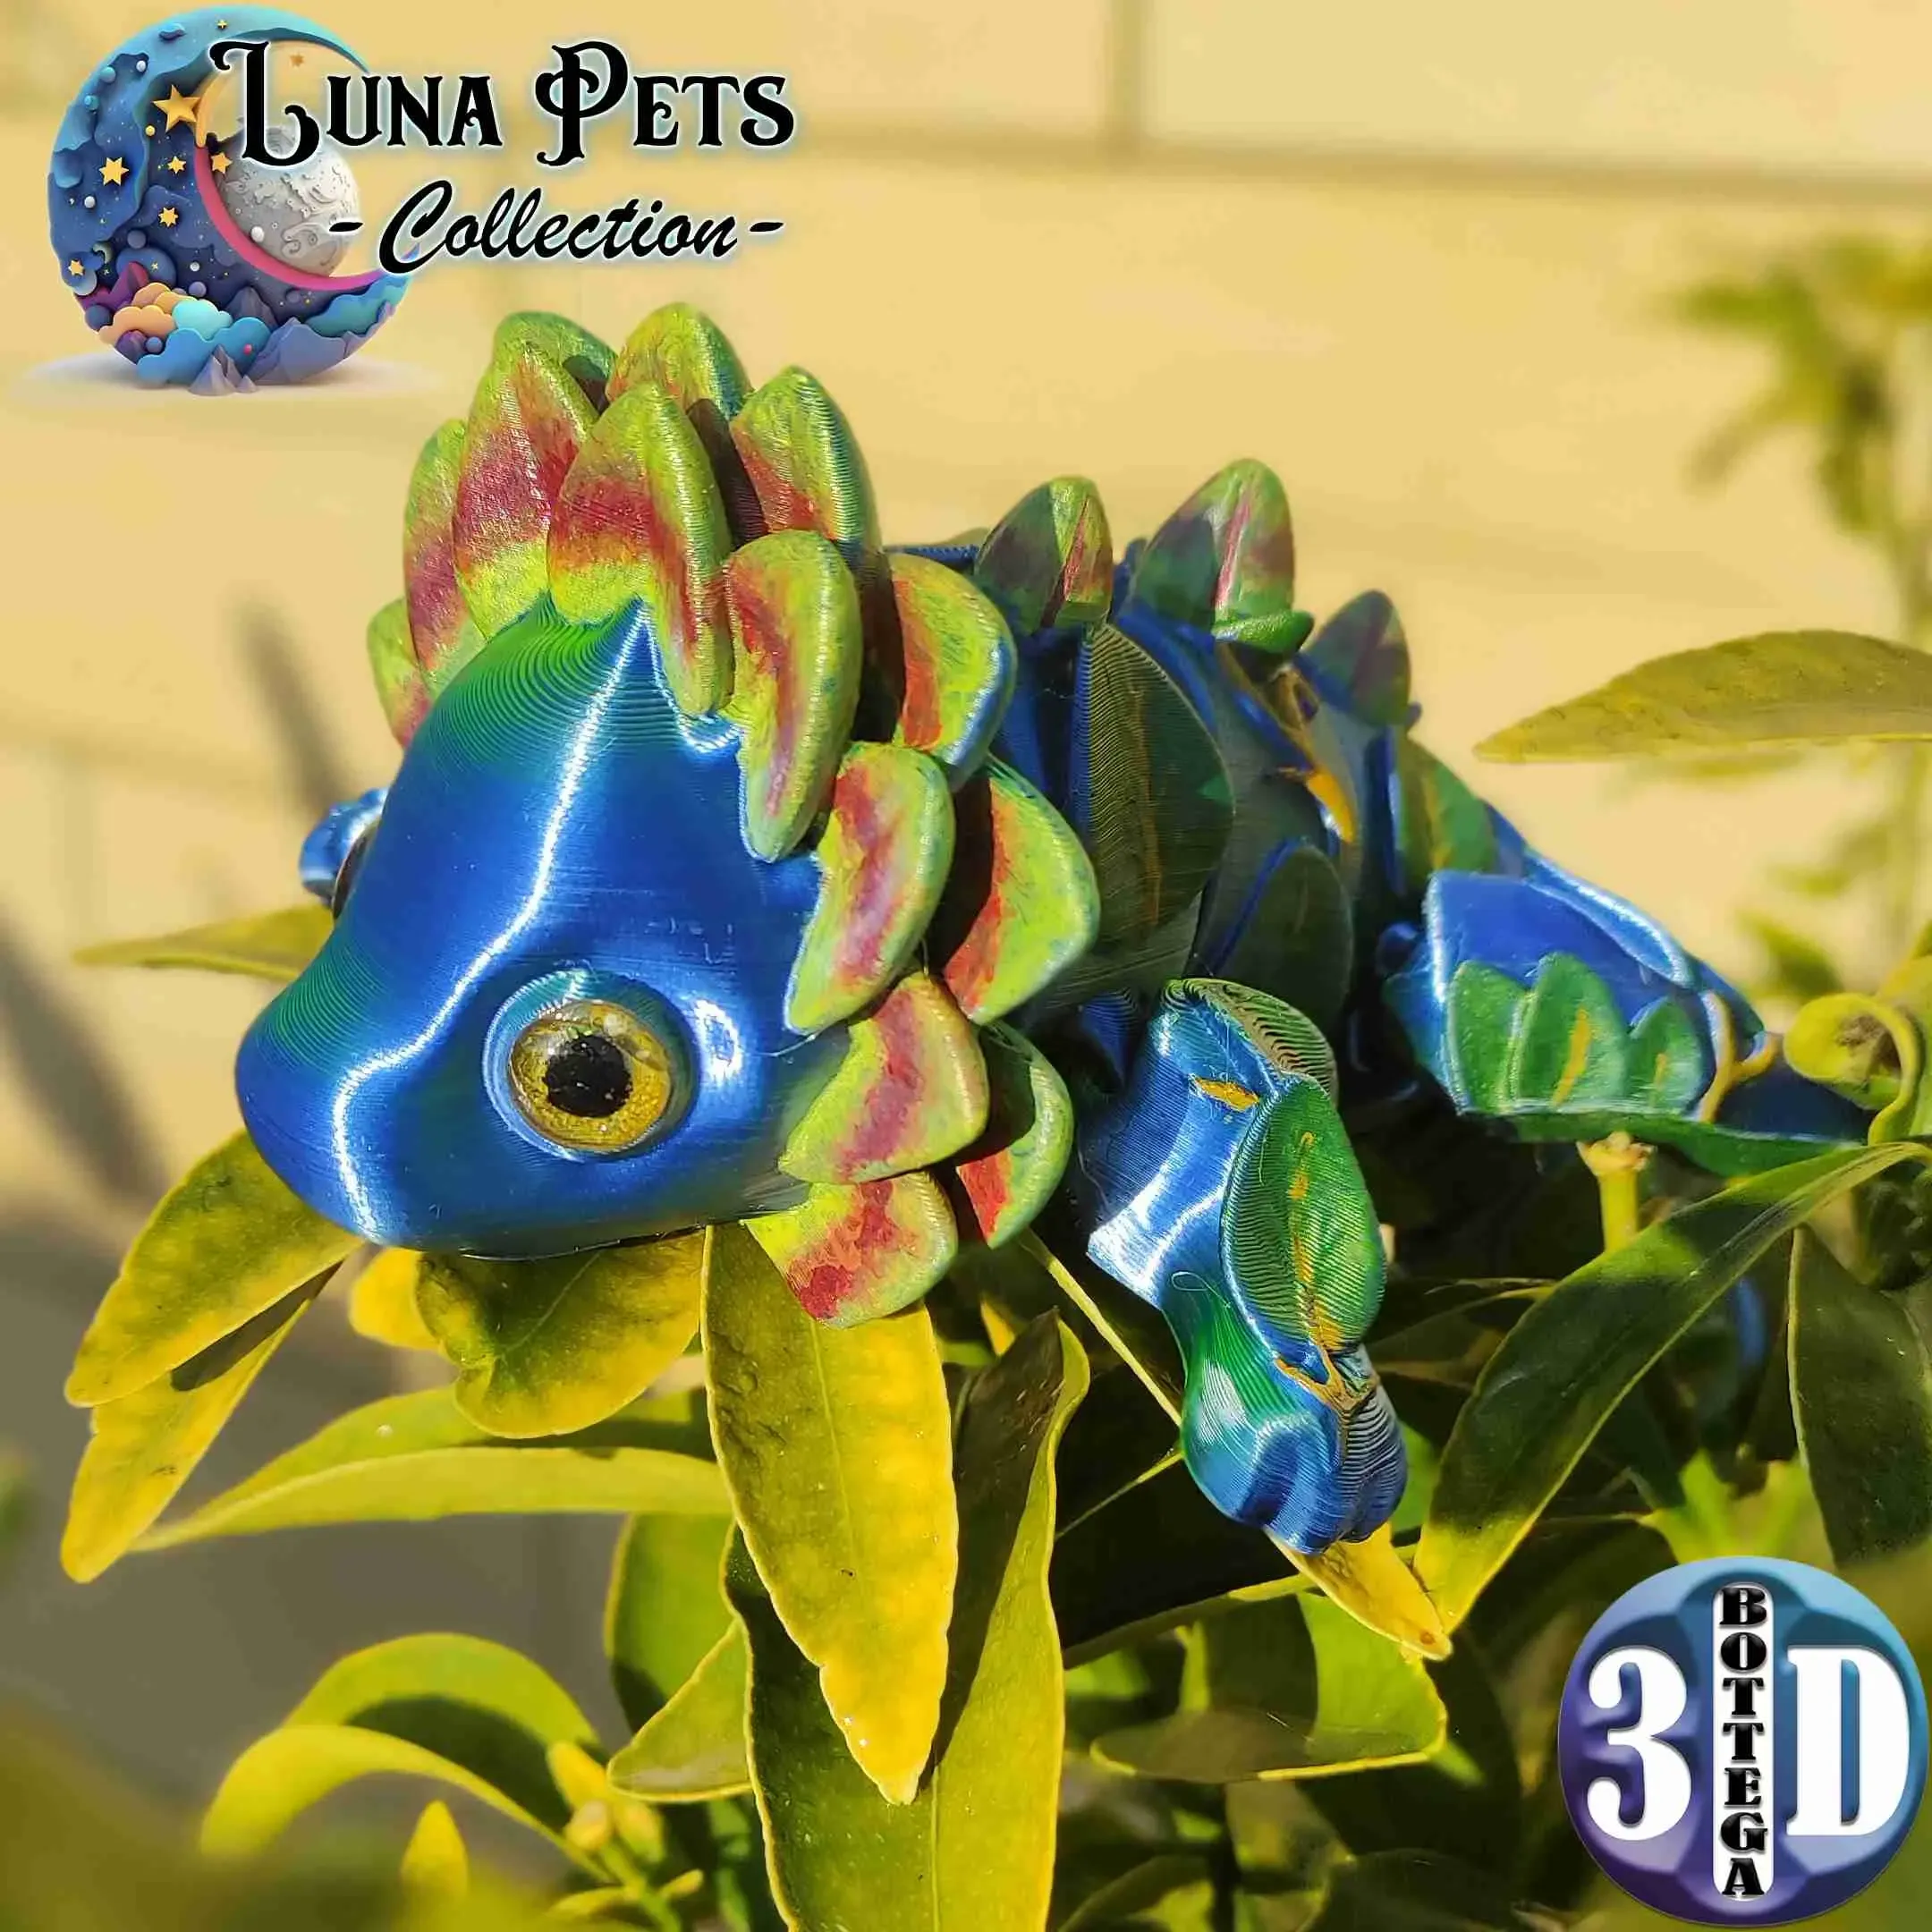 LUNA PETS COLLECTION - Sunflowern - articulated baby dragon